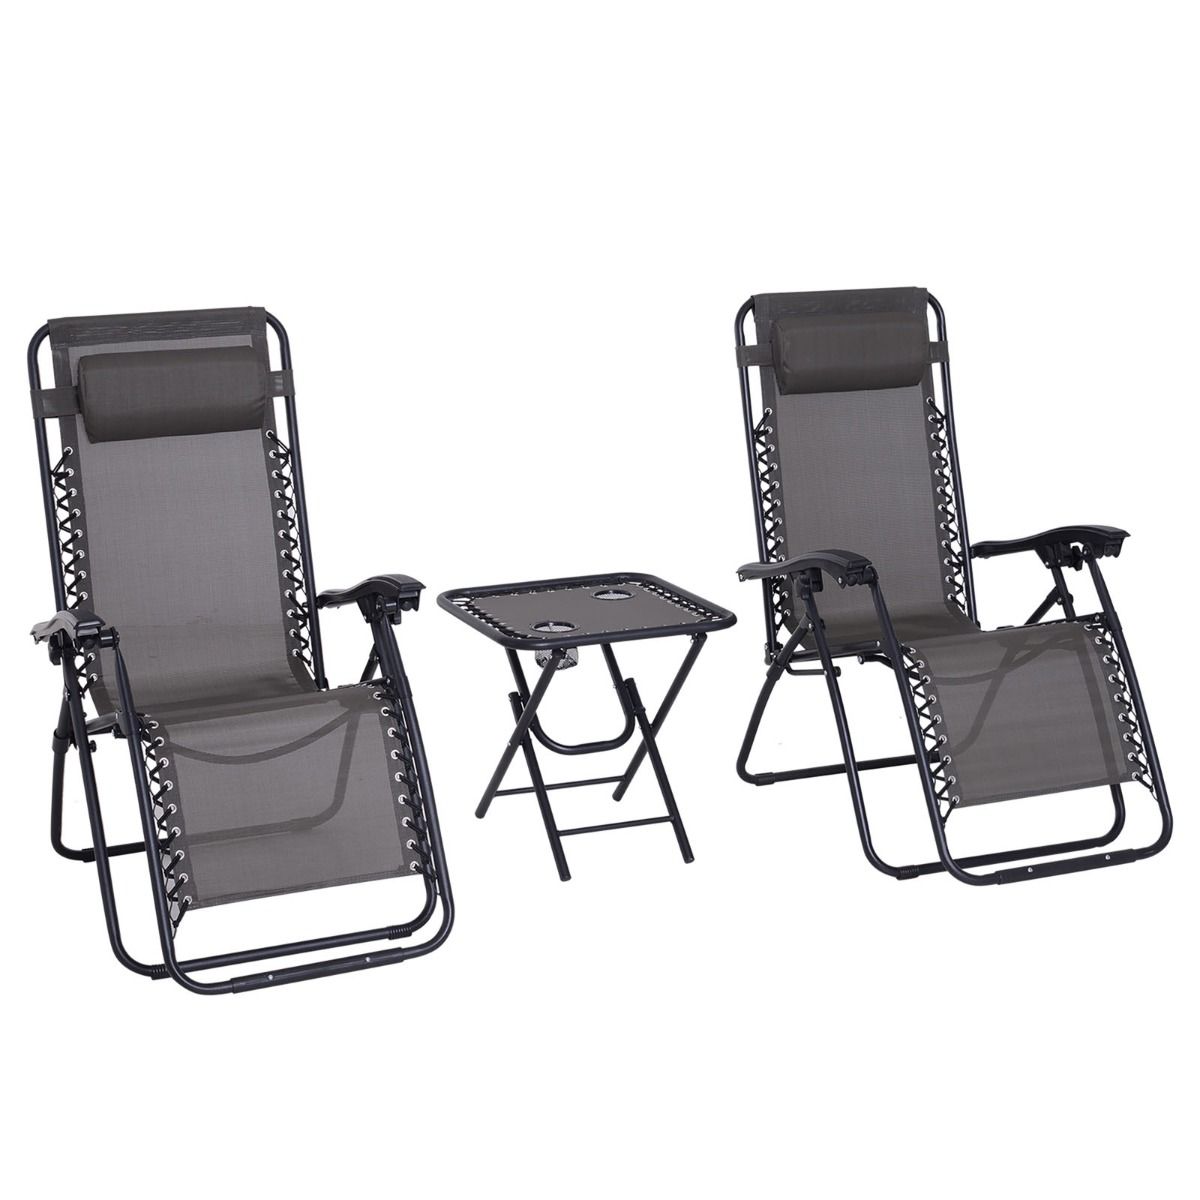 Outsunny Zero-Gravity Chairs With Foldable Table, Grey - 2 Chairs